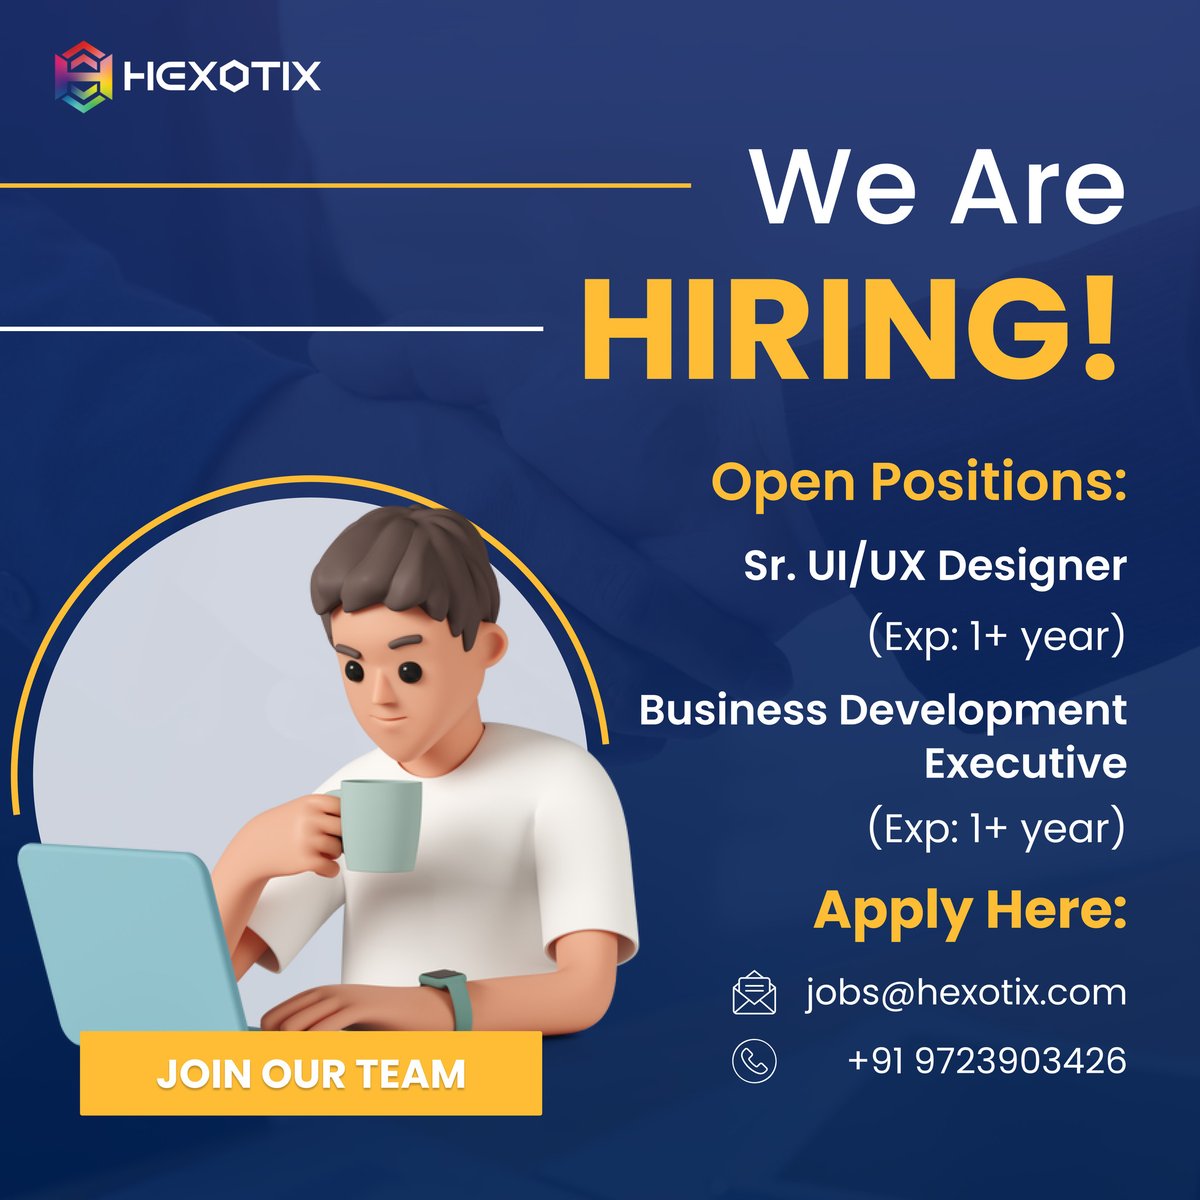 Are you an outgoing person who wants to work in a lively and exciting environment? Then our job vacancy post is just for you!

#job #opportunities #openings #vacancy #vacancies #jobsearch #suratjobs #ahmedabadjobs #hiring #hiringnow #hr